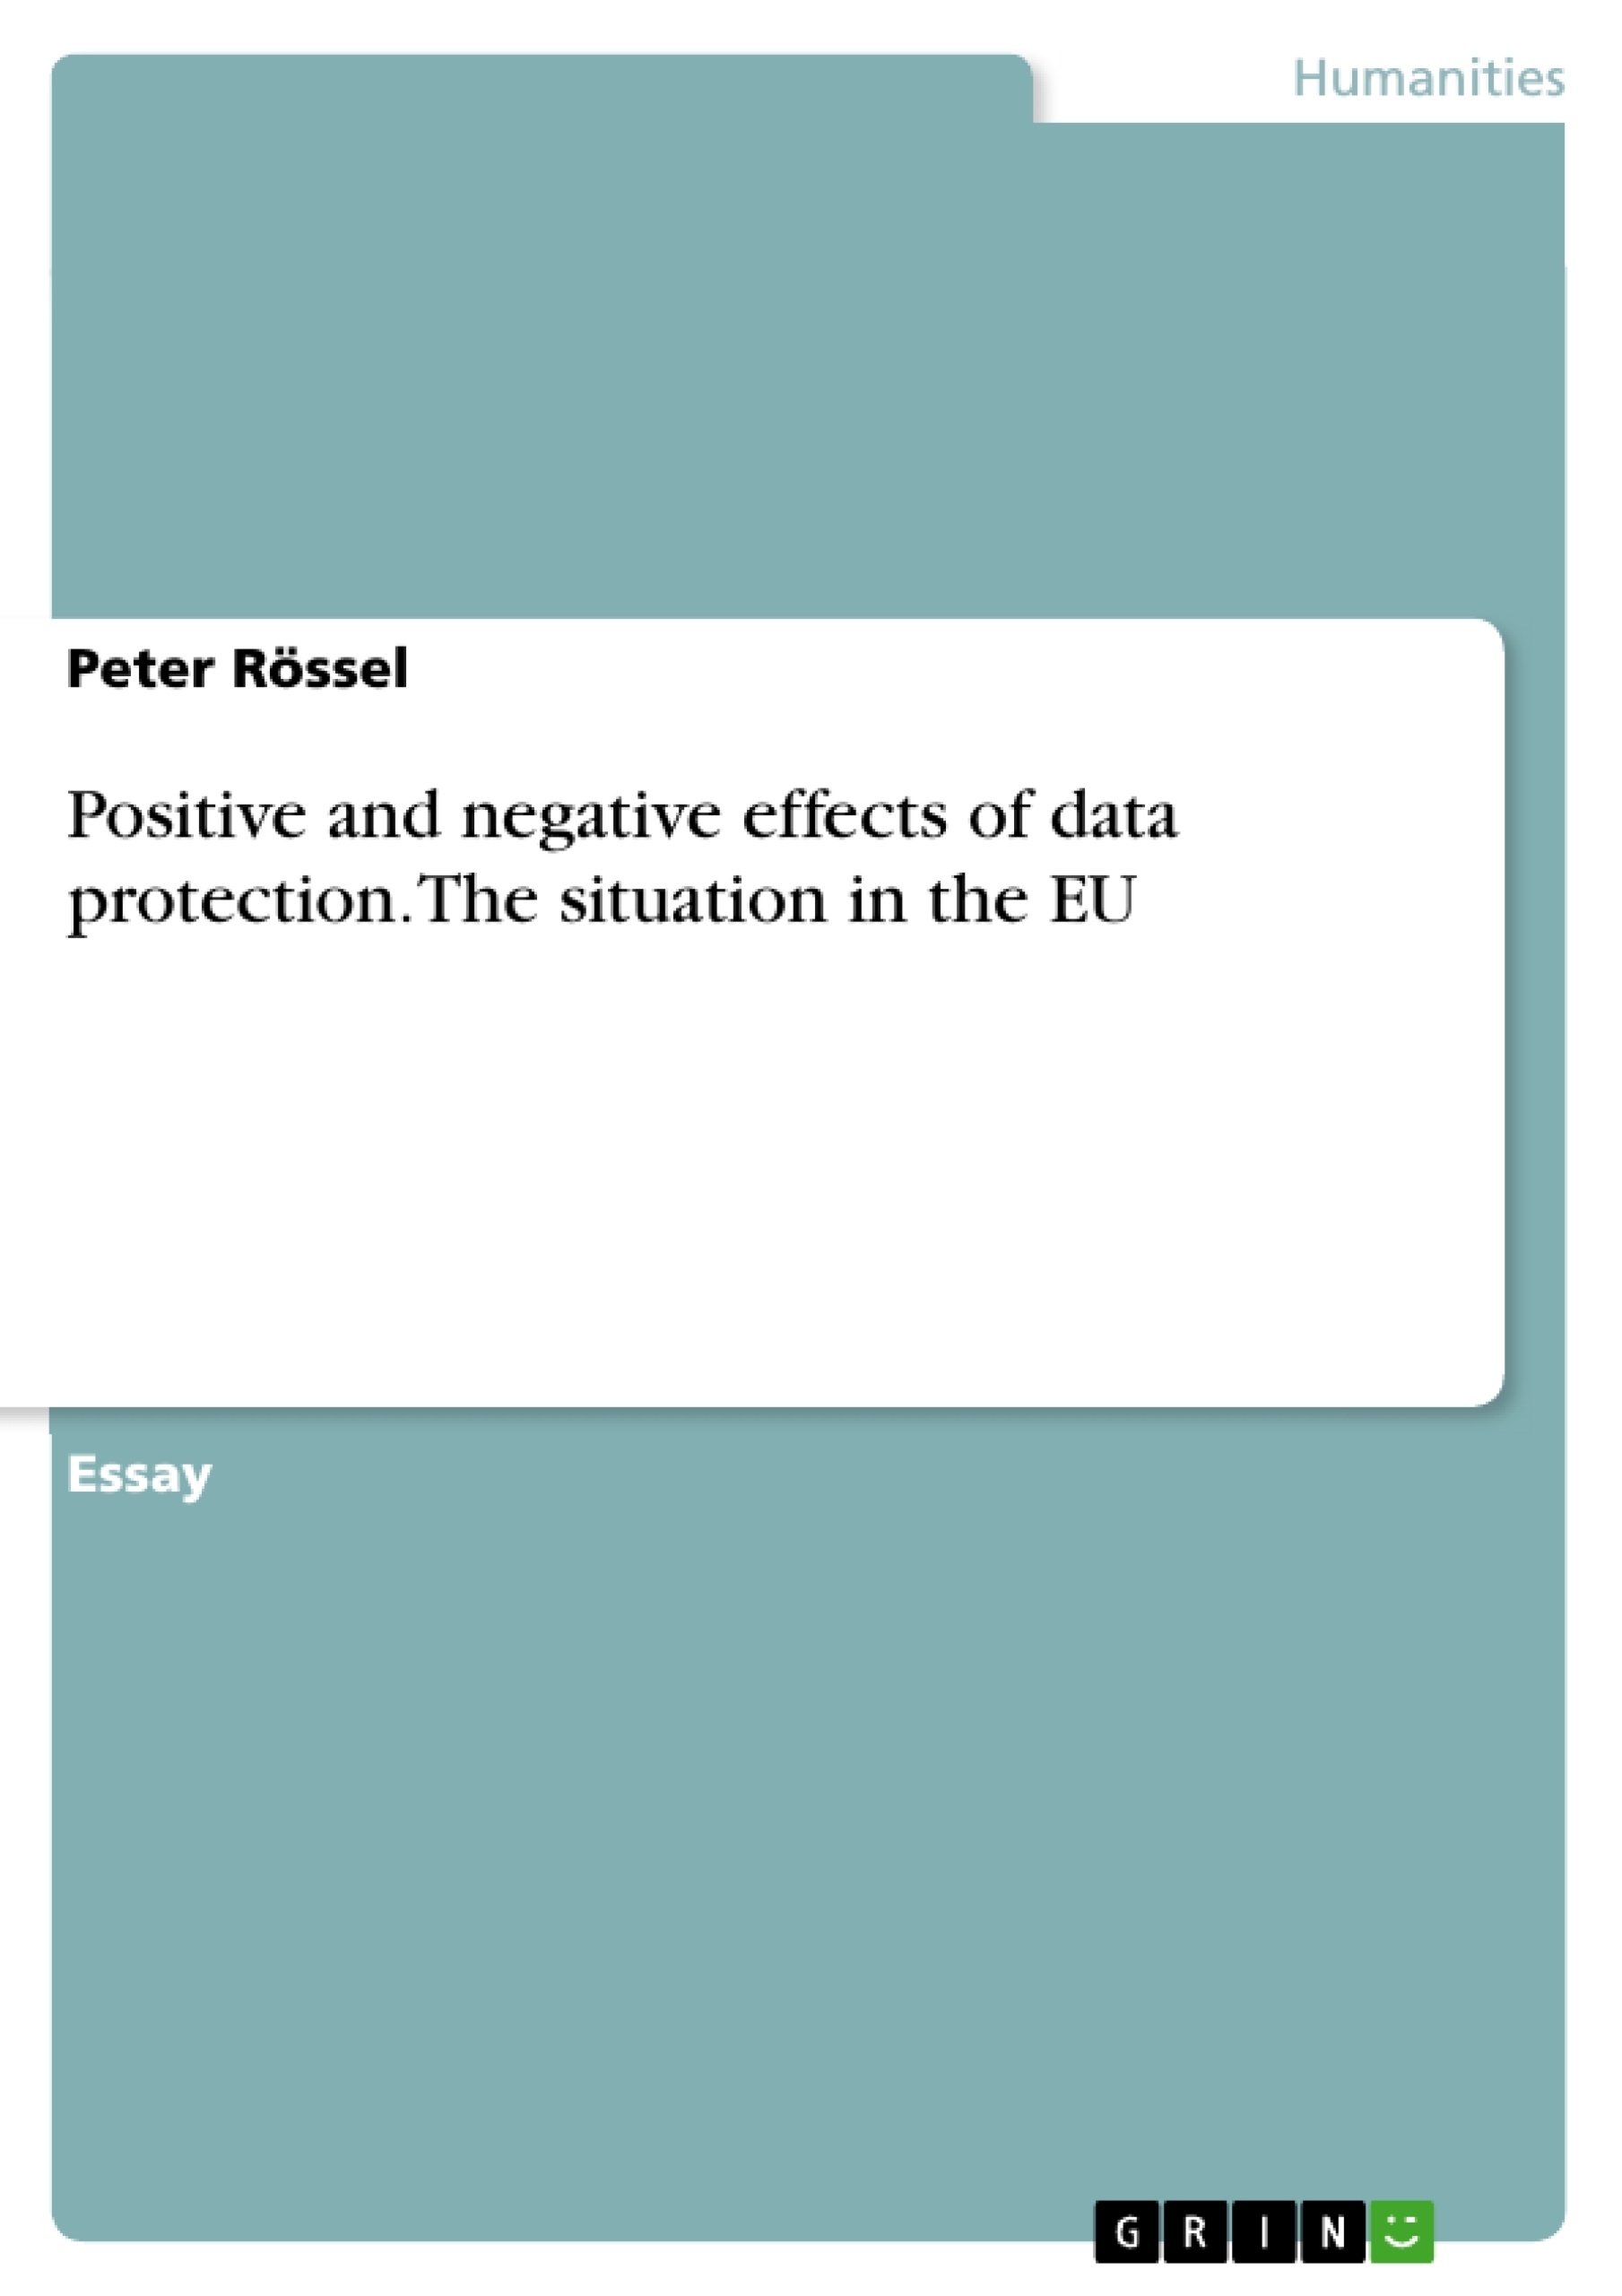 Title: Positive and negative effects of data protection. The situation in the EU